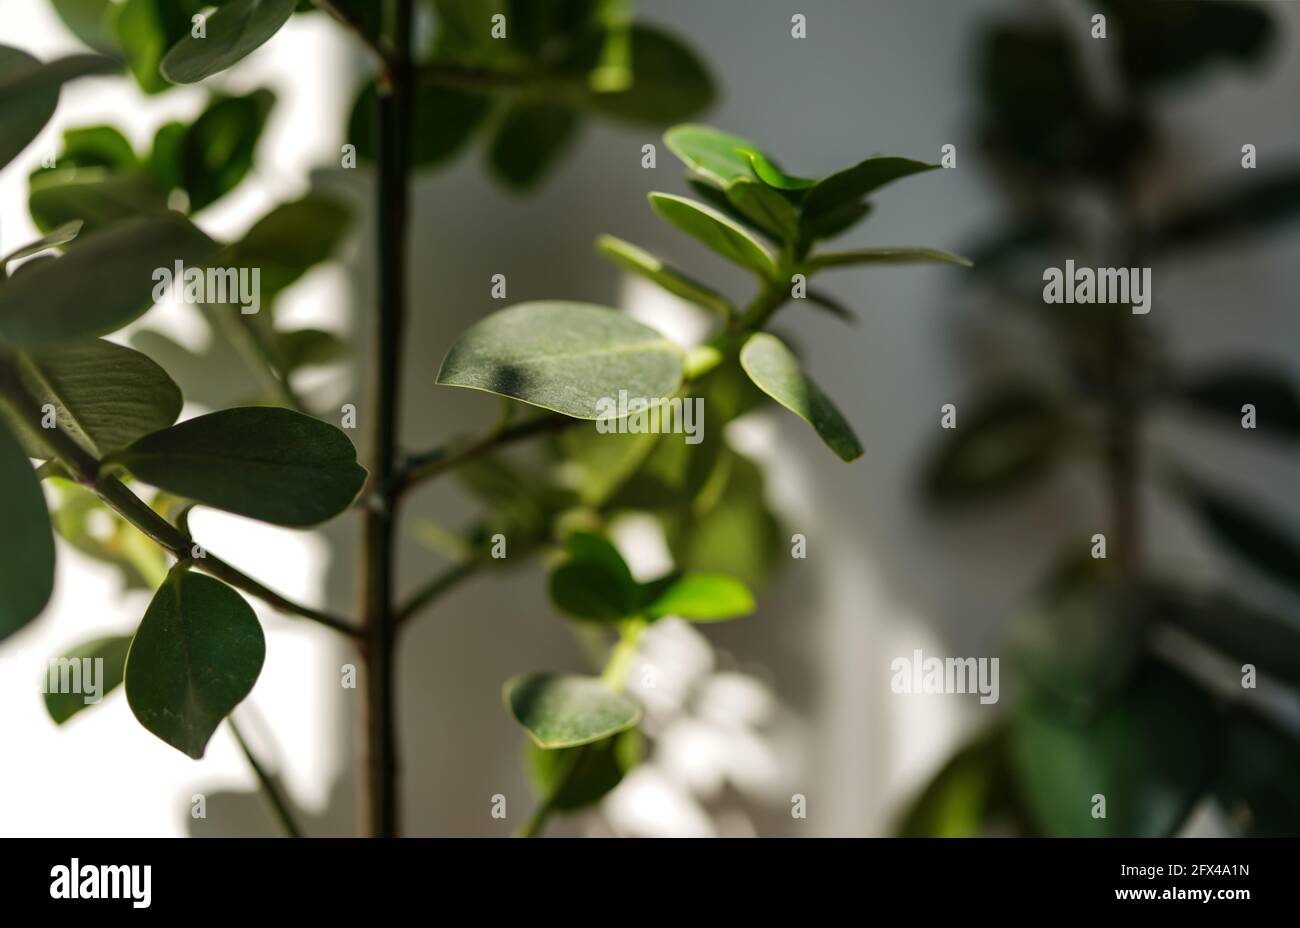 Sun shines on room plants from side, casting shadows - shallow depth of field photo, only few leaves in focus Stock Photo